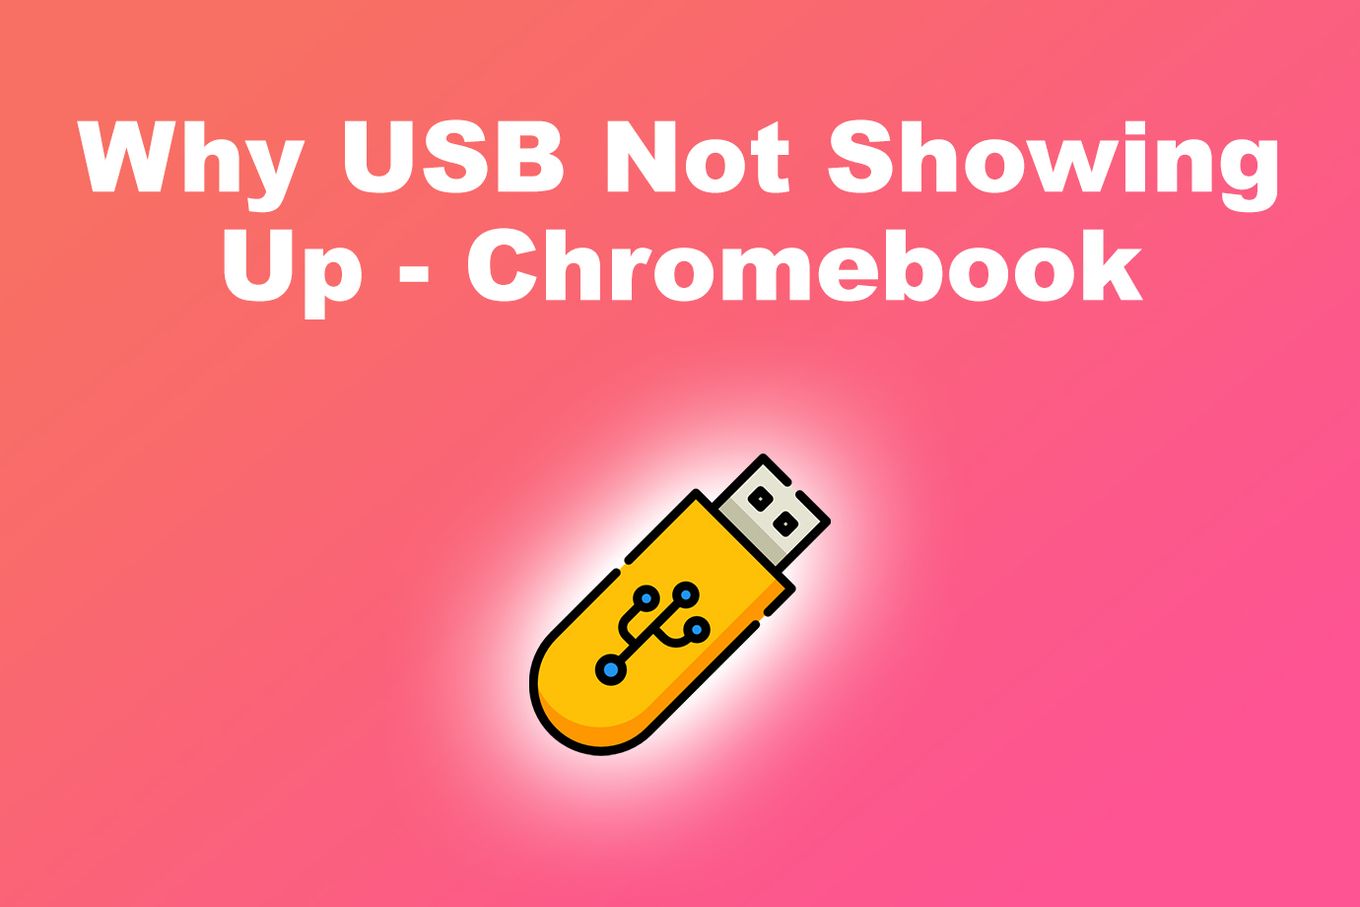 Why USB Not Showing Up - Chromebook